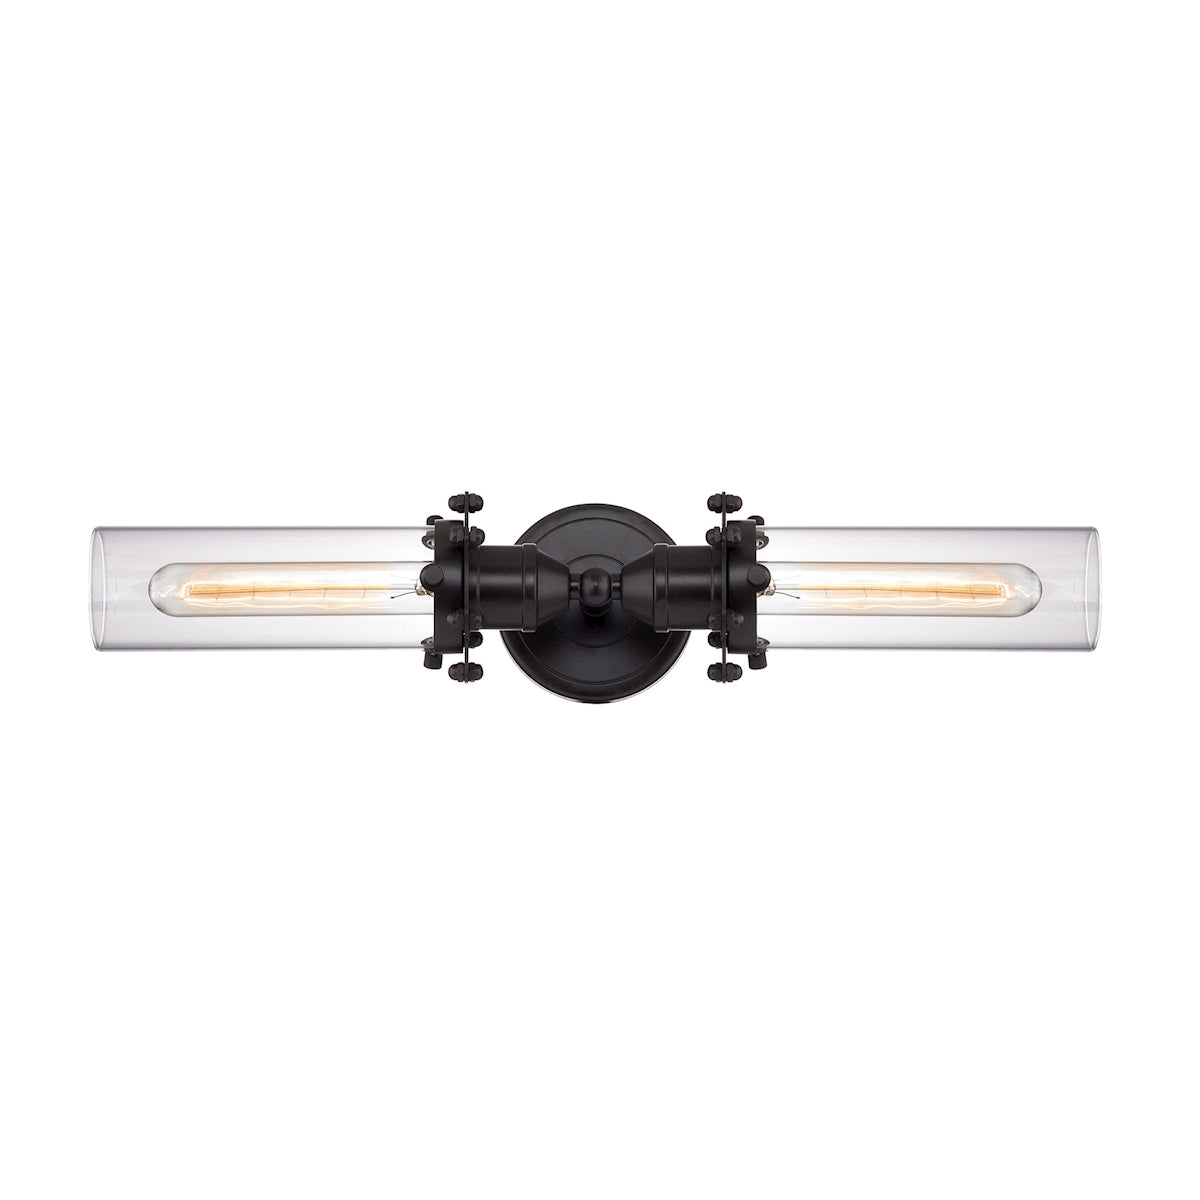 ELK Lighting 67341/2 - Fulton 20" Wide 2-Light Vanity Light in Oil Rubbed Bronze with Clear Glass